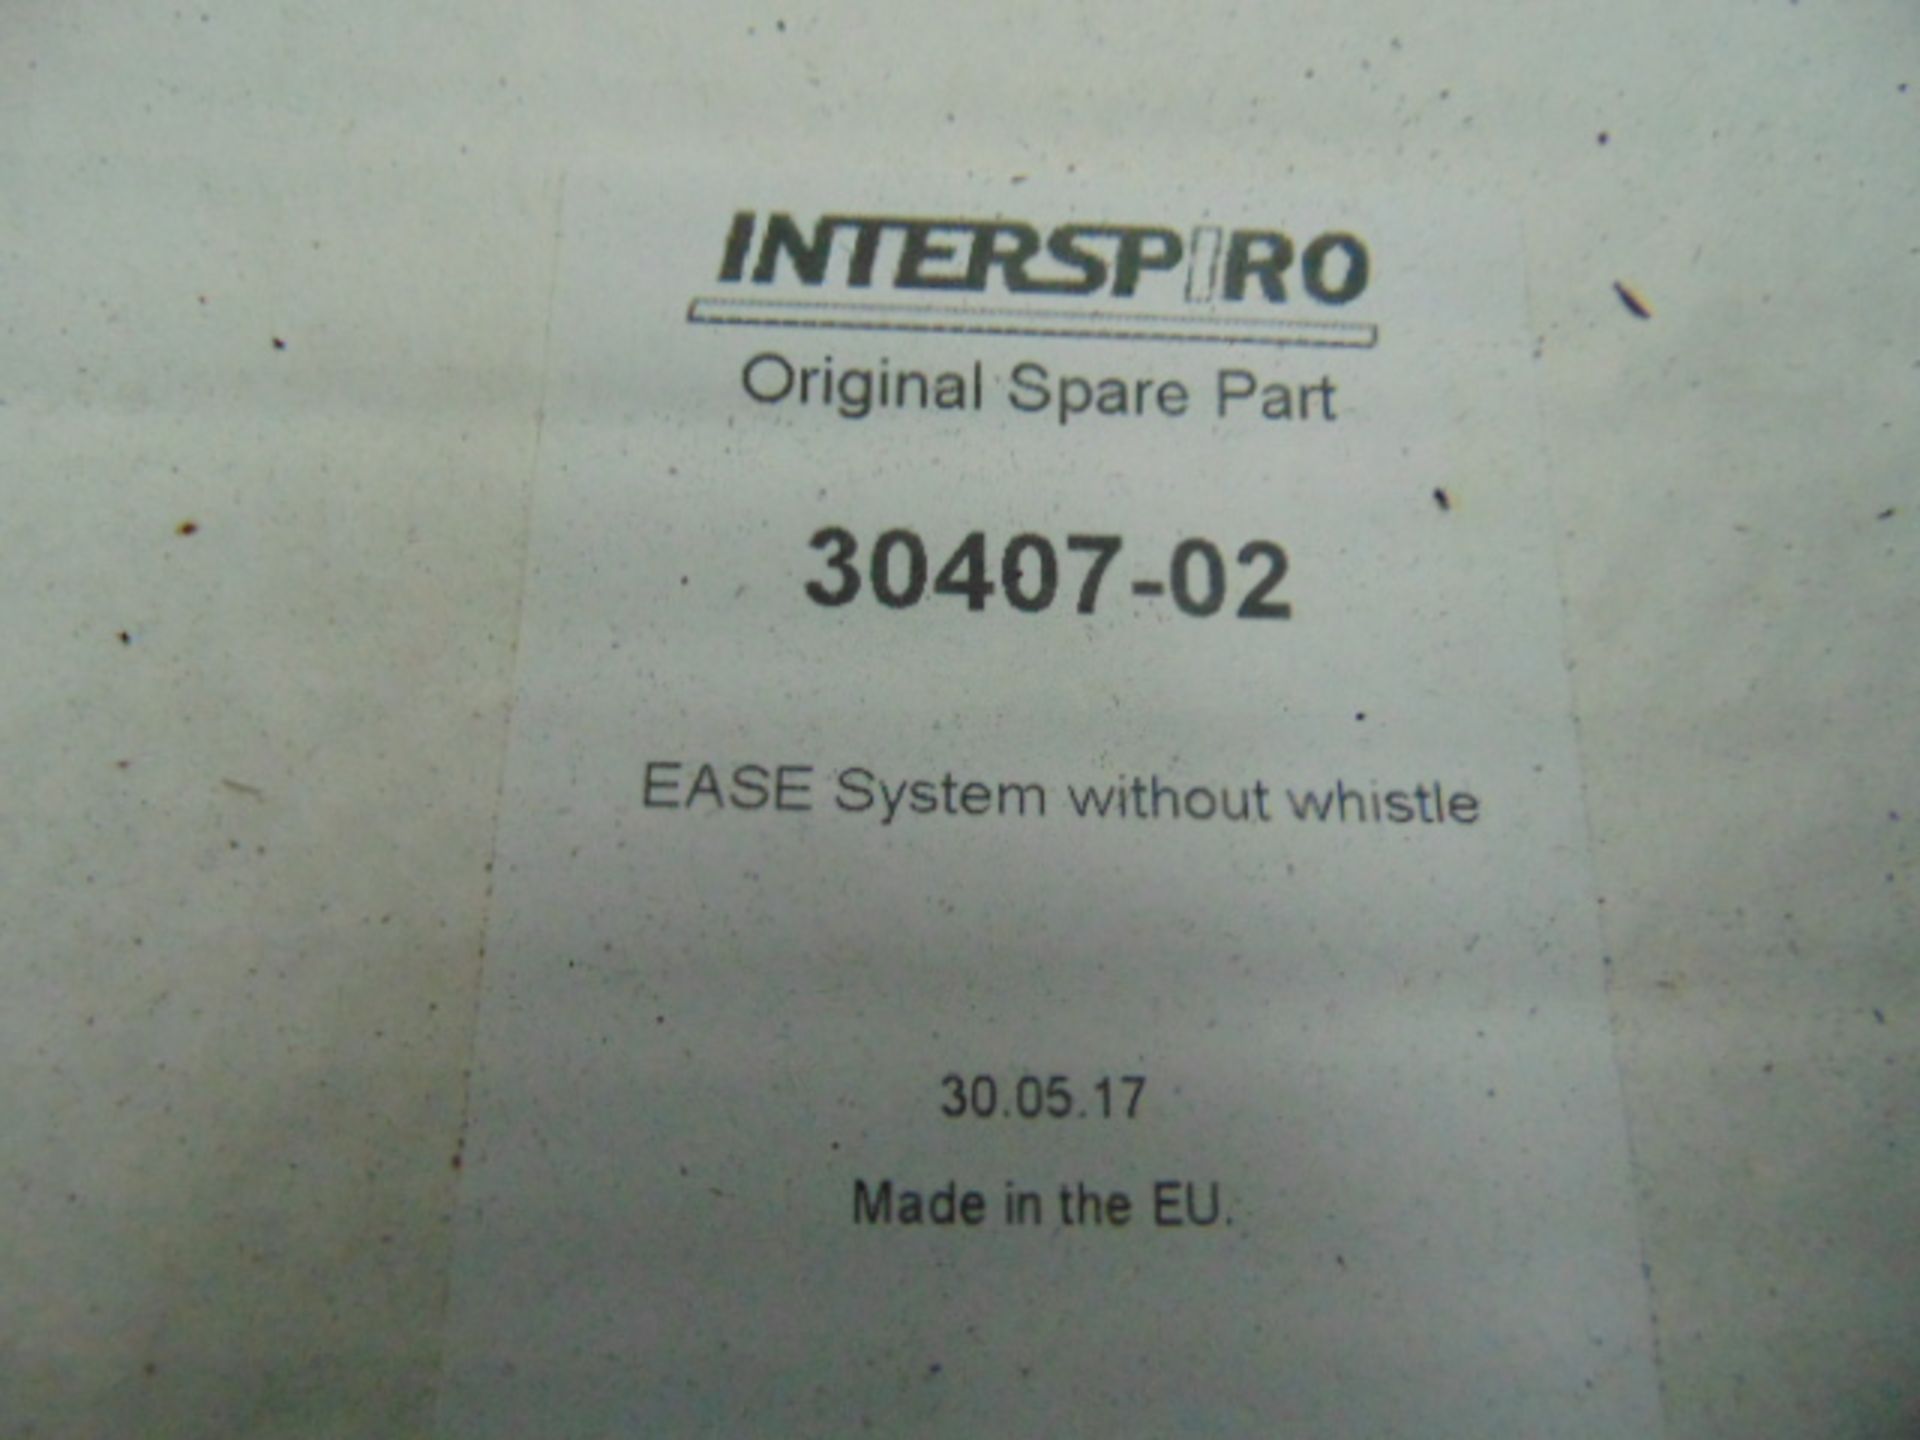 Qty 14 Unissued Interspiro Ease Sets - Image 2 of 3